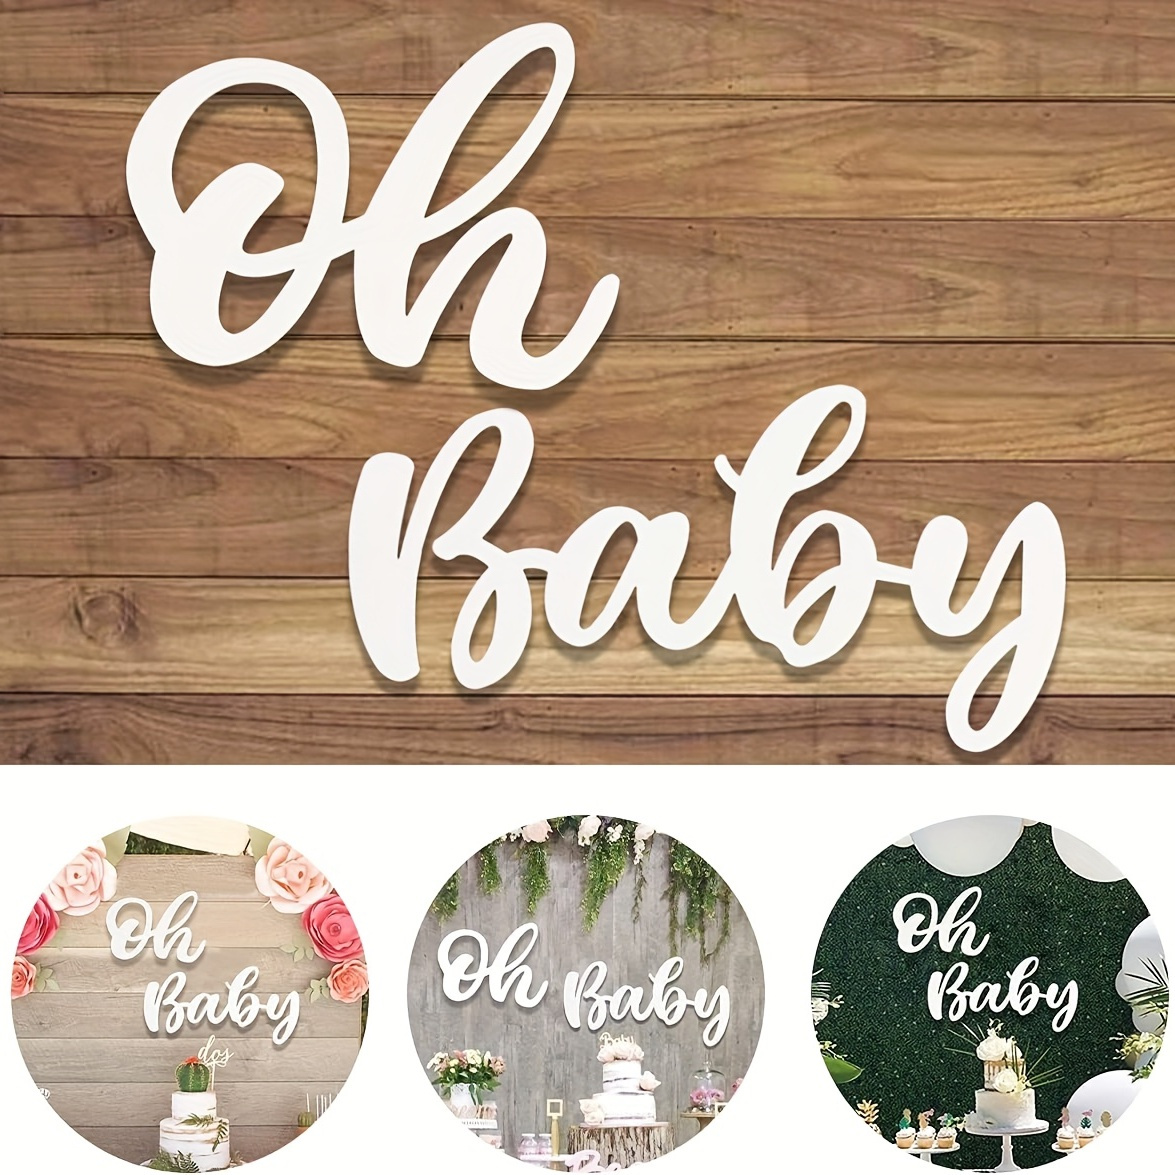 

1pc Wood White Baby Sign, Baby Shower Banner For 1st Birthday Backdrop, Party Sign Wooden Cutout Decor, Party Banner Event Decorations For Gender Reveal Backdrop, Announcements Accessories